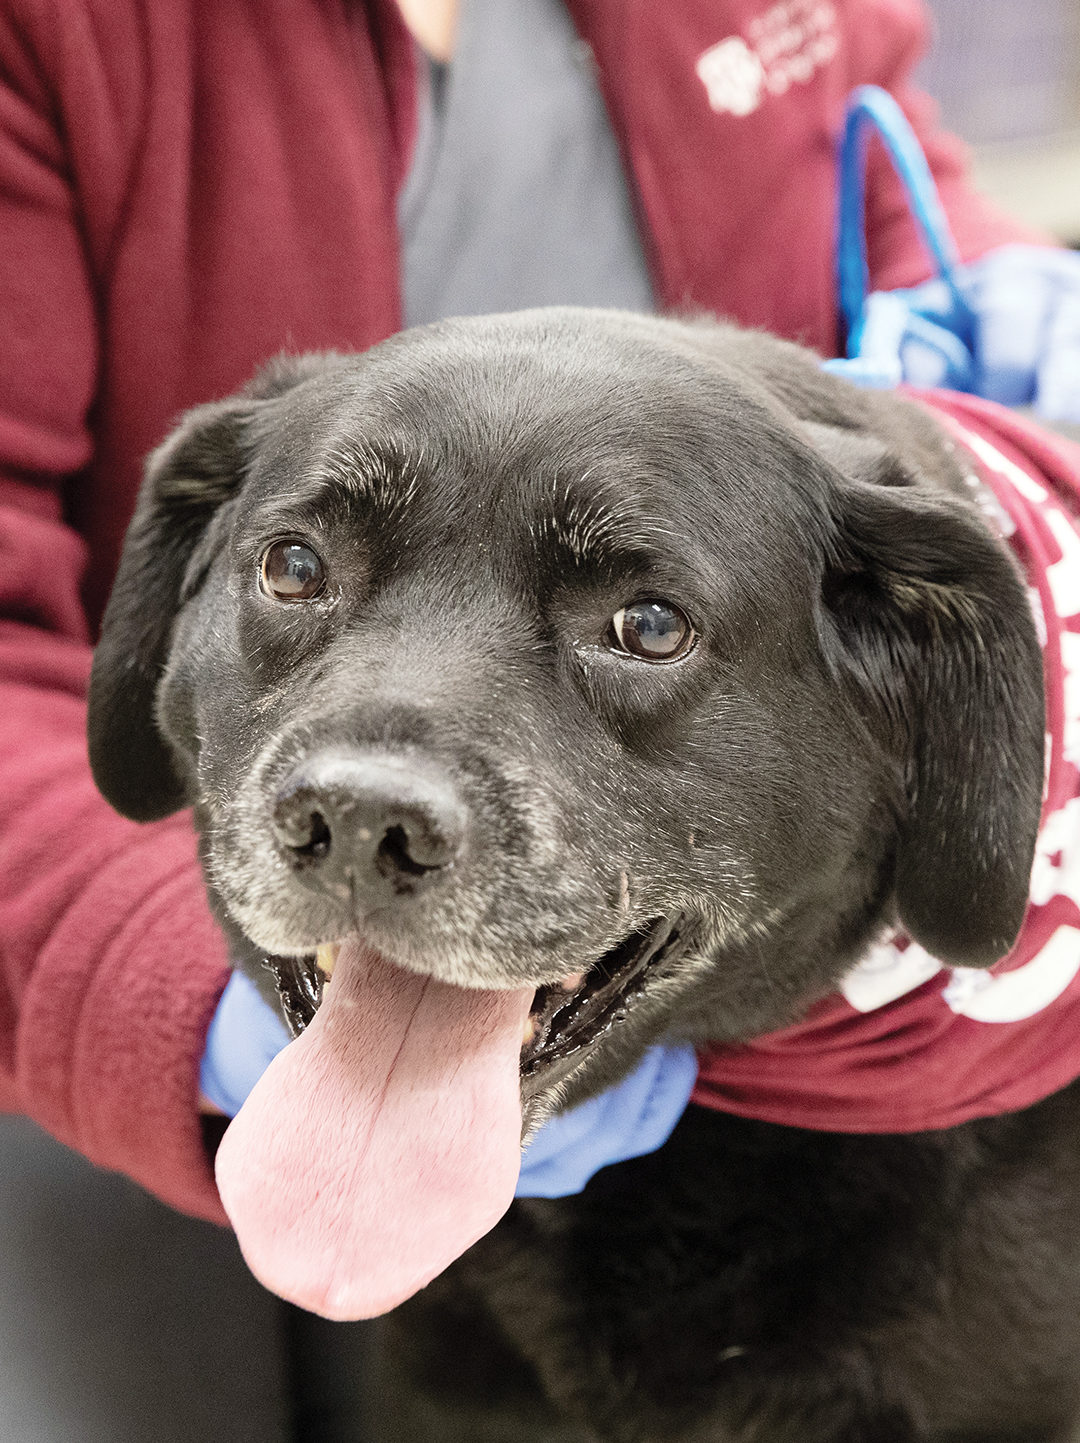 Lilly the black lab, a Gary Sinise Foundation funds recipient, with her tongue out at the Texas A&M VMTH